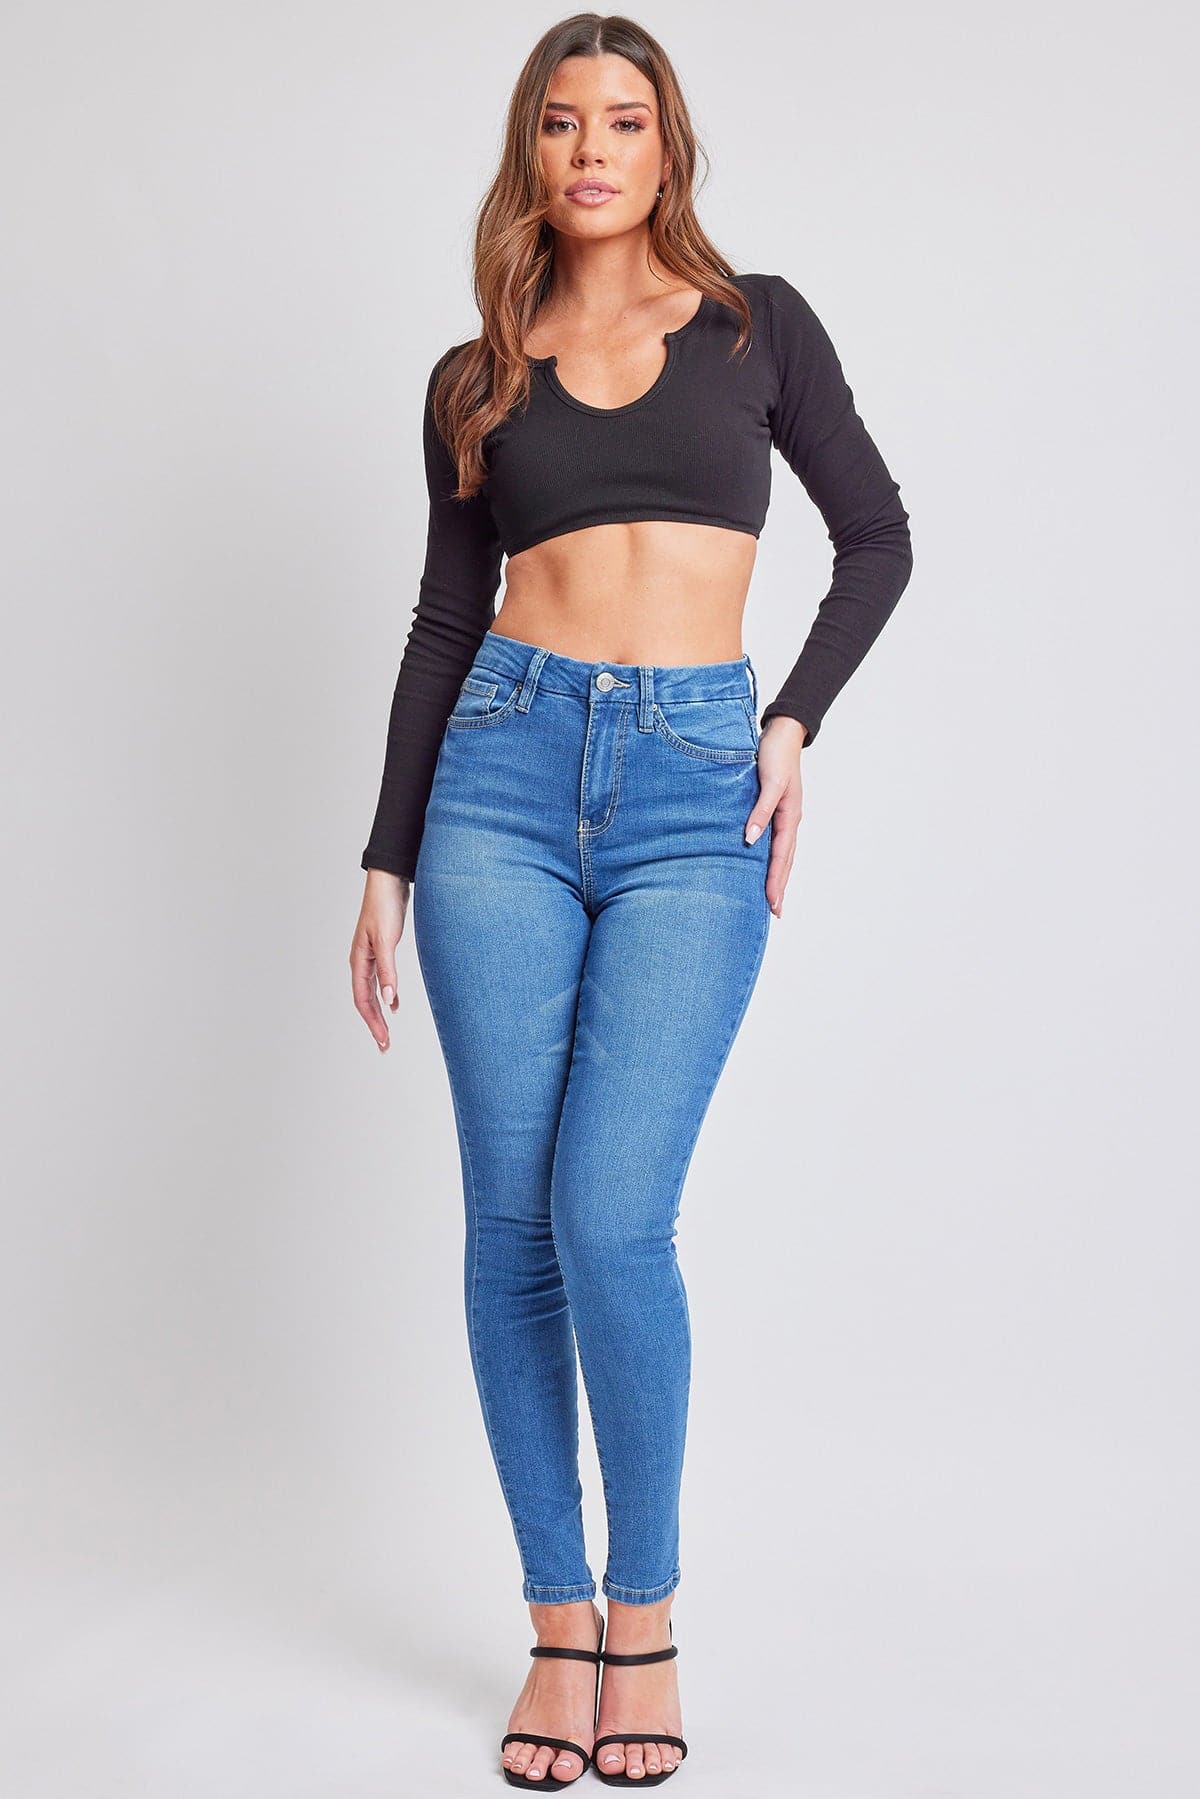 Women's Sustainable Curvy Fit Skinny Jeans from YMI – YMI JEANS